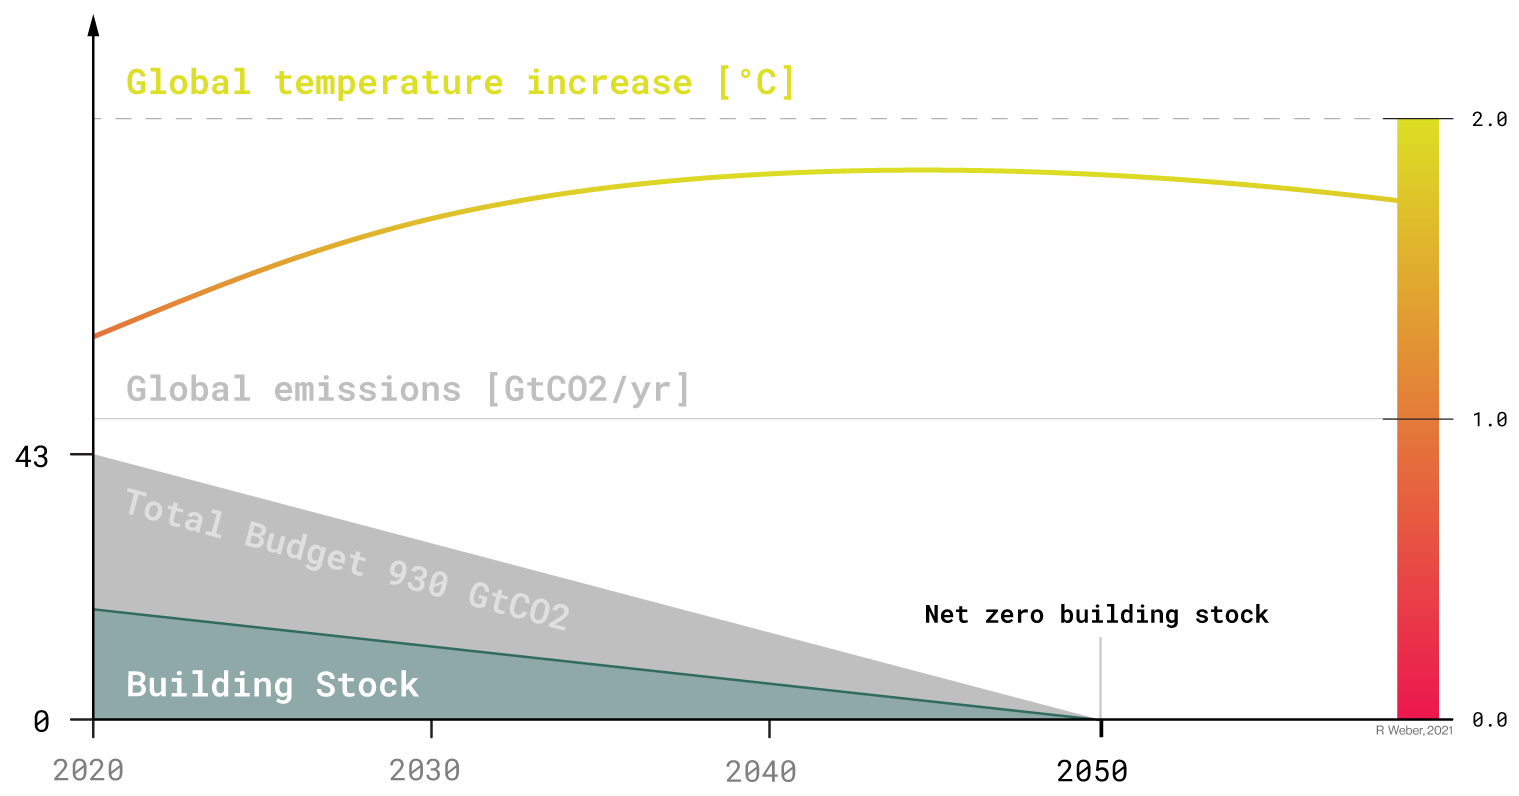 Decrease of the global emissions necessary to stay below the 2.0° C global climate goal